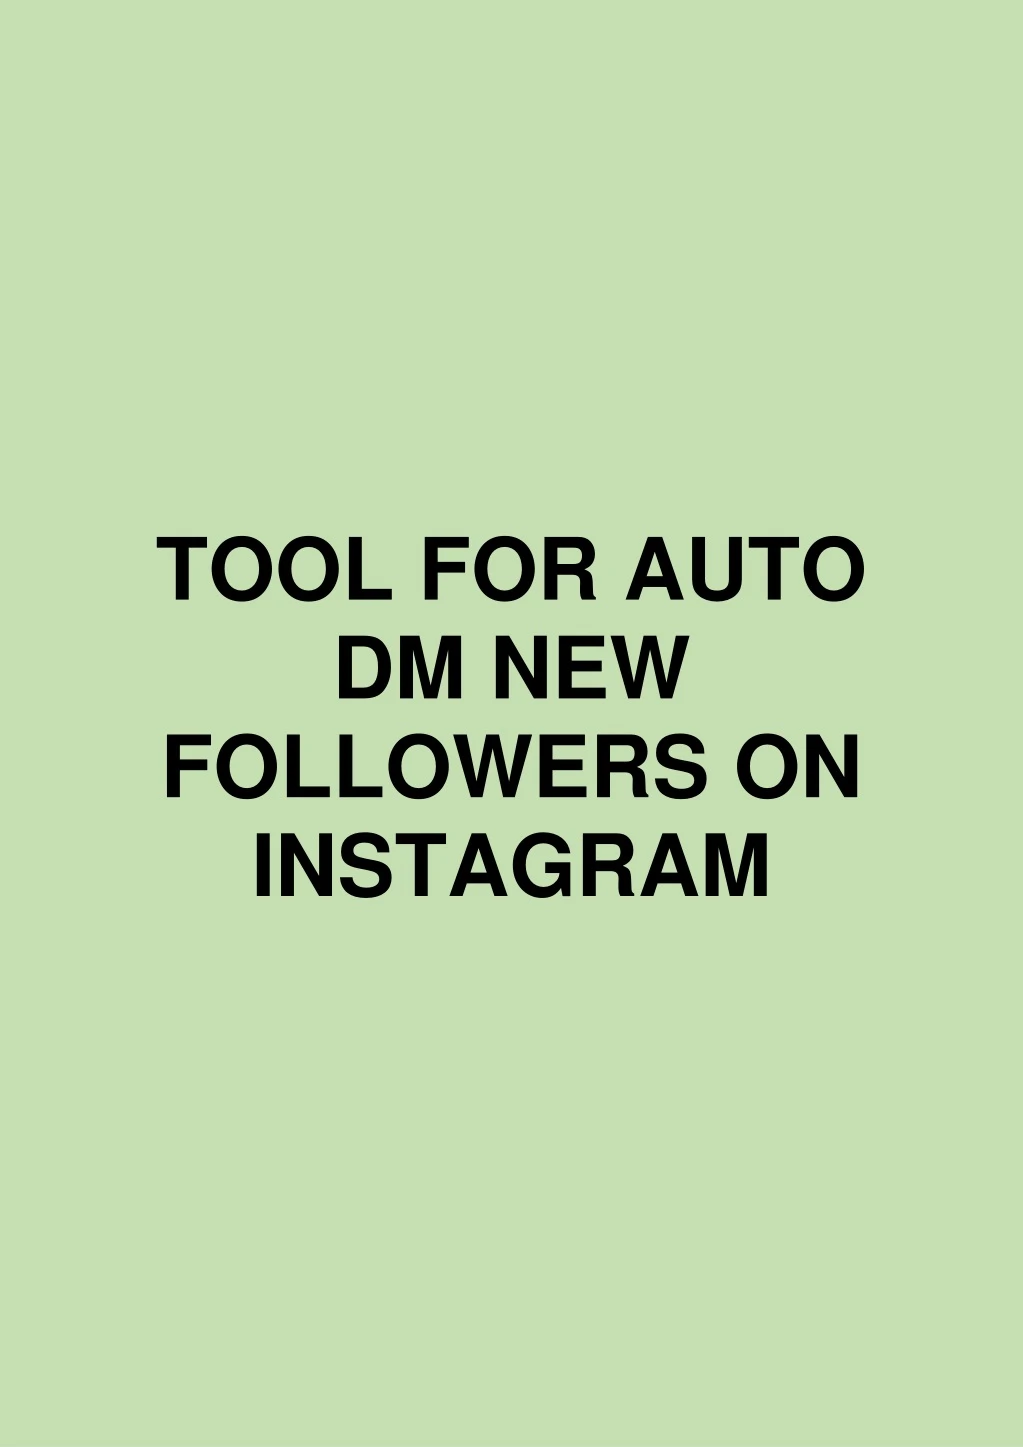 tool for auto dm new followers on instagram